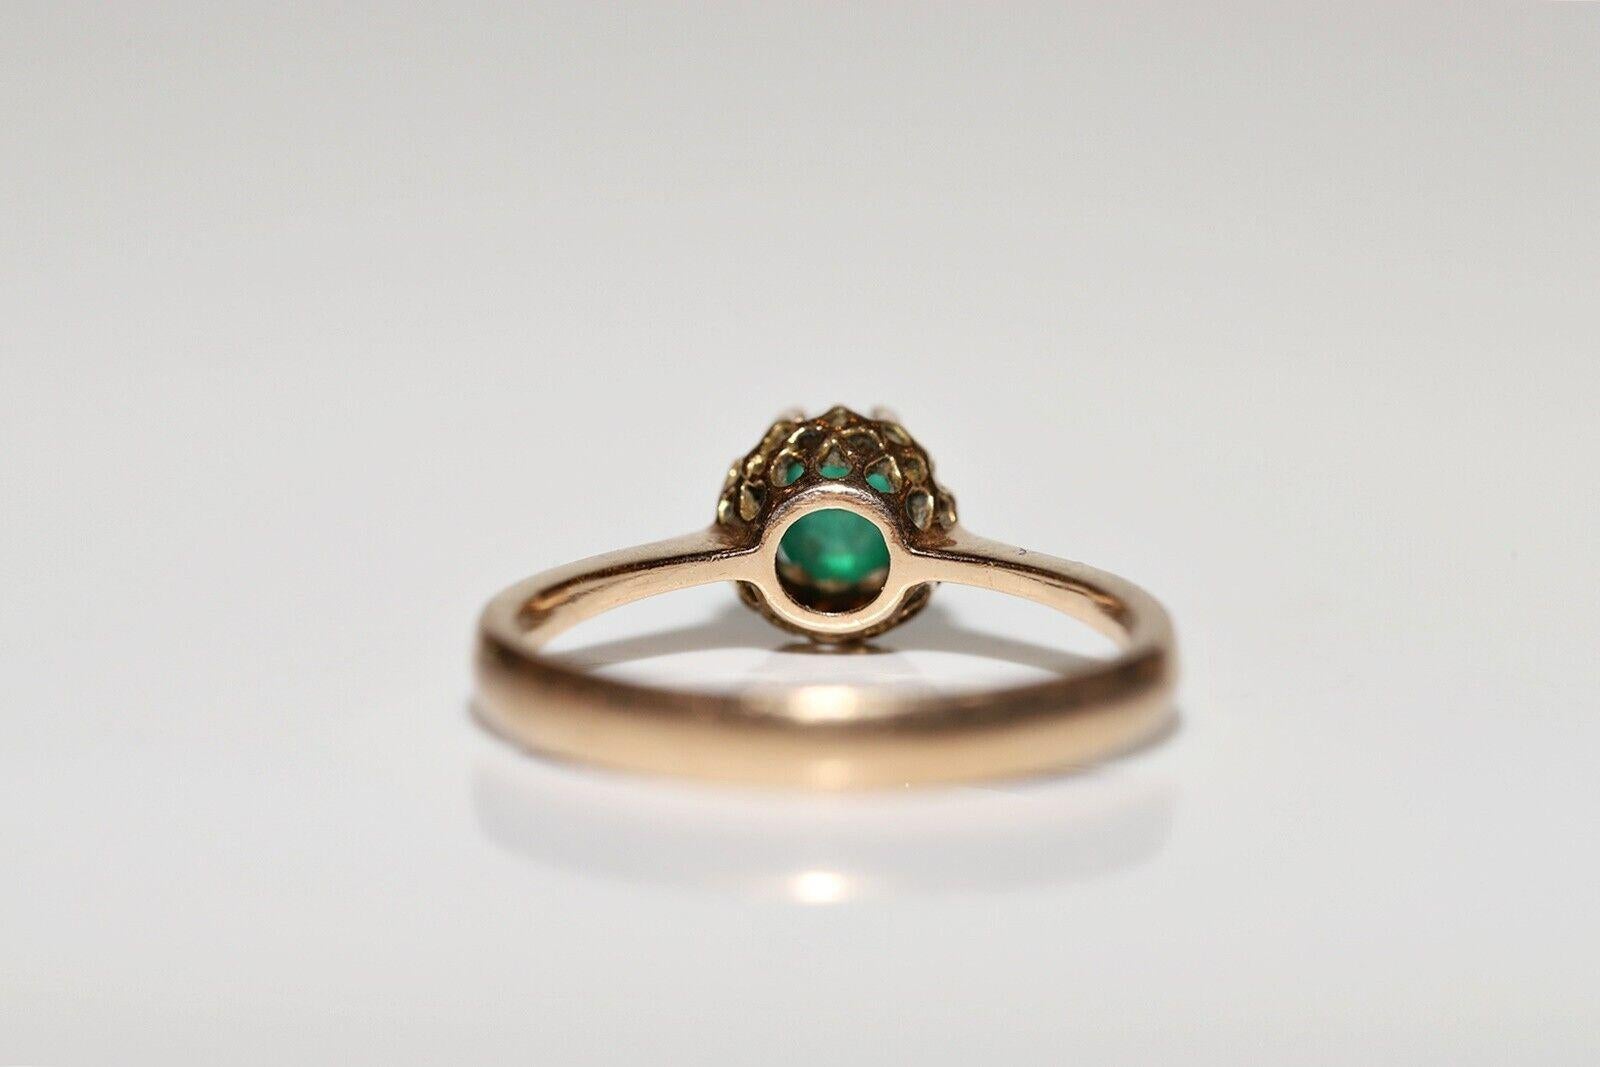 Antique Circa 1900s 14k Gold Natural Cabochon Emerald Solitaire Ring For Sale 3